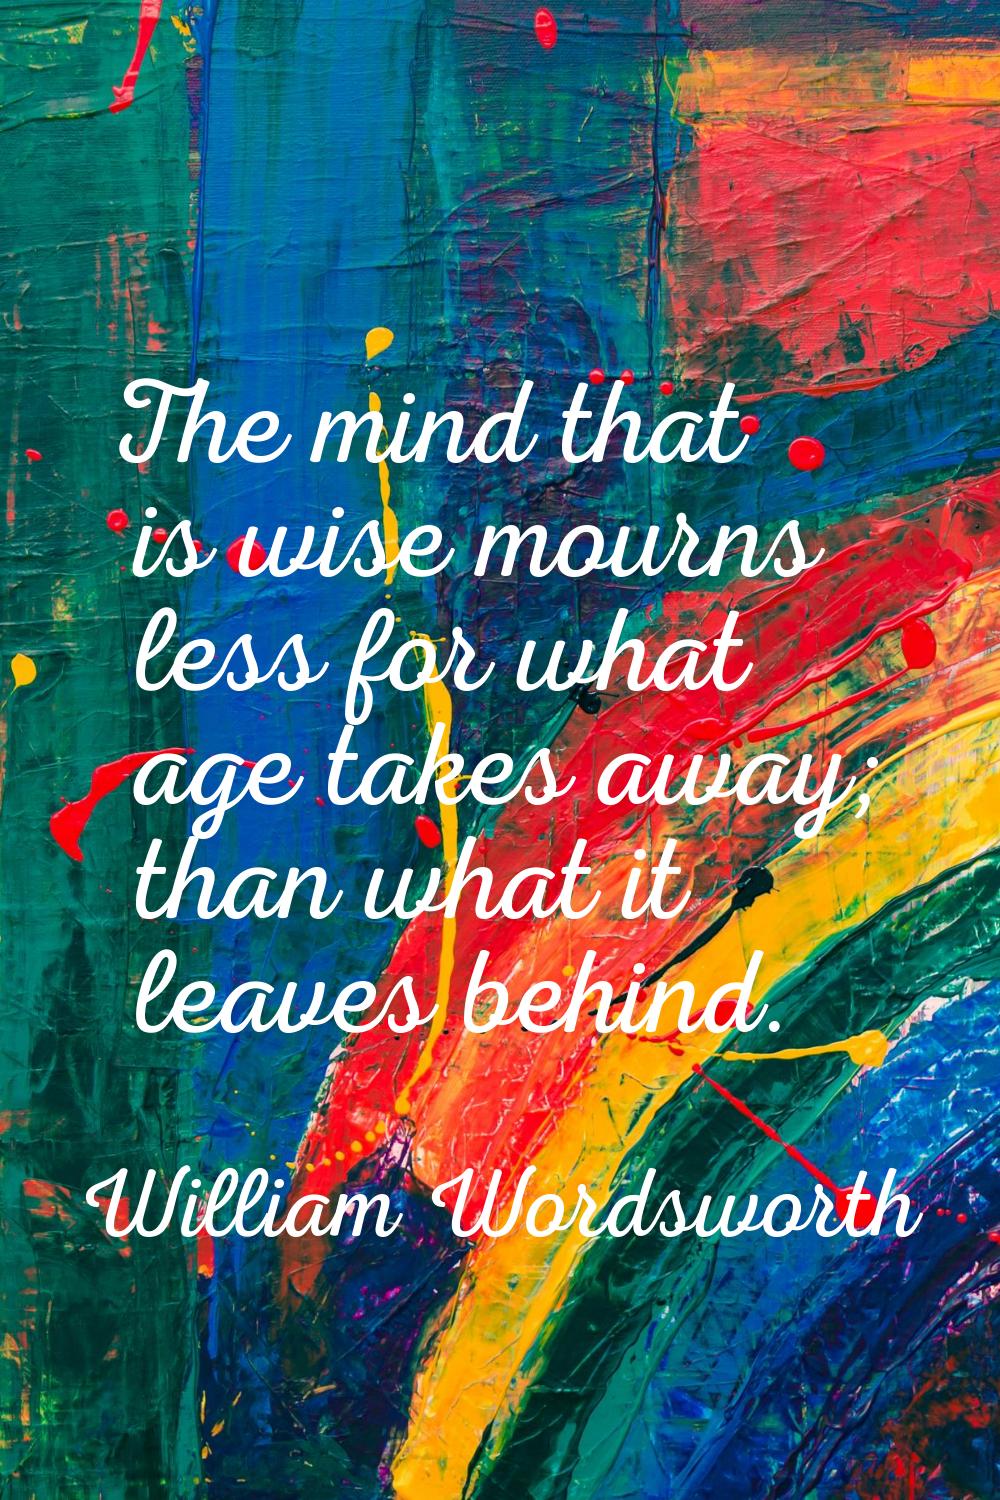 The mind that is wise mourns less for what age takes away; than what it leaves behind.